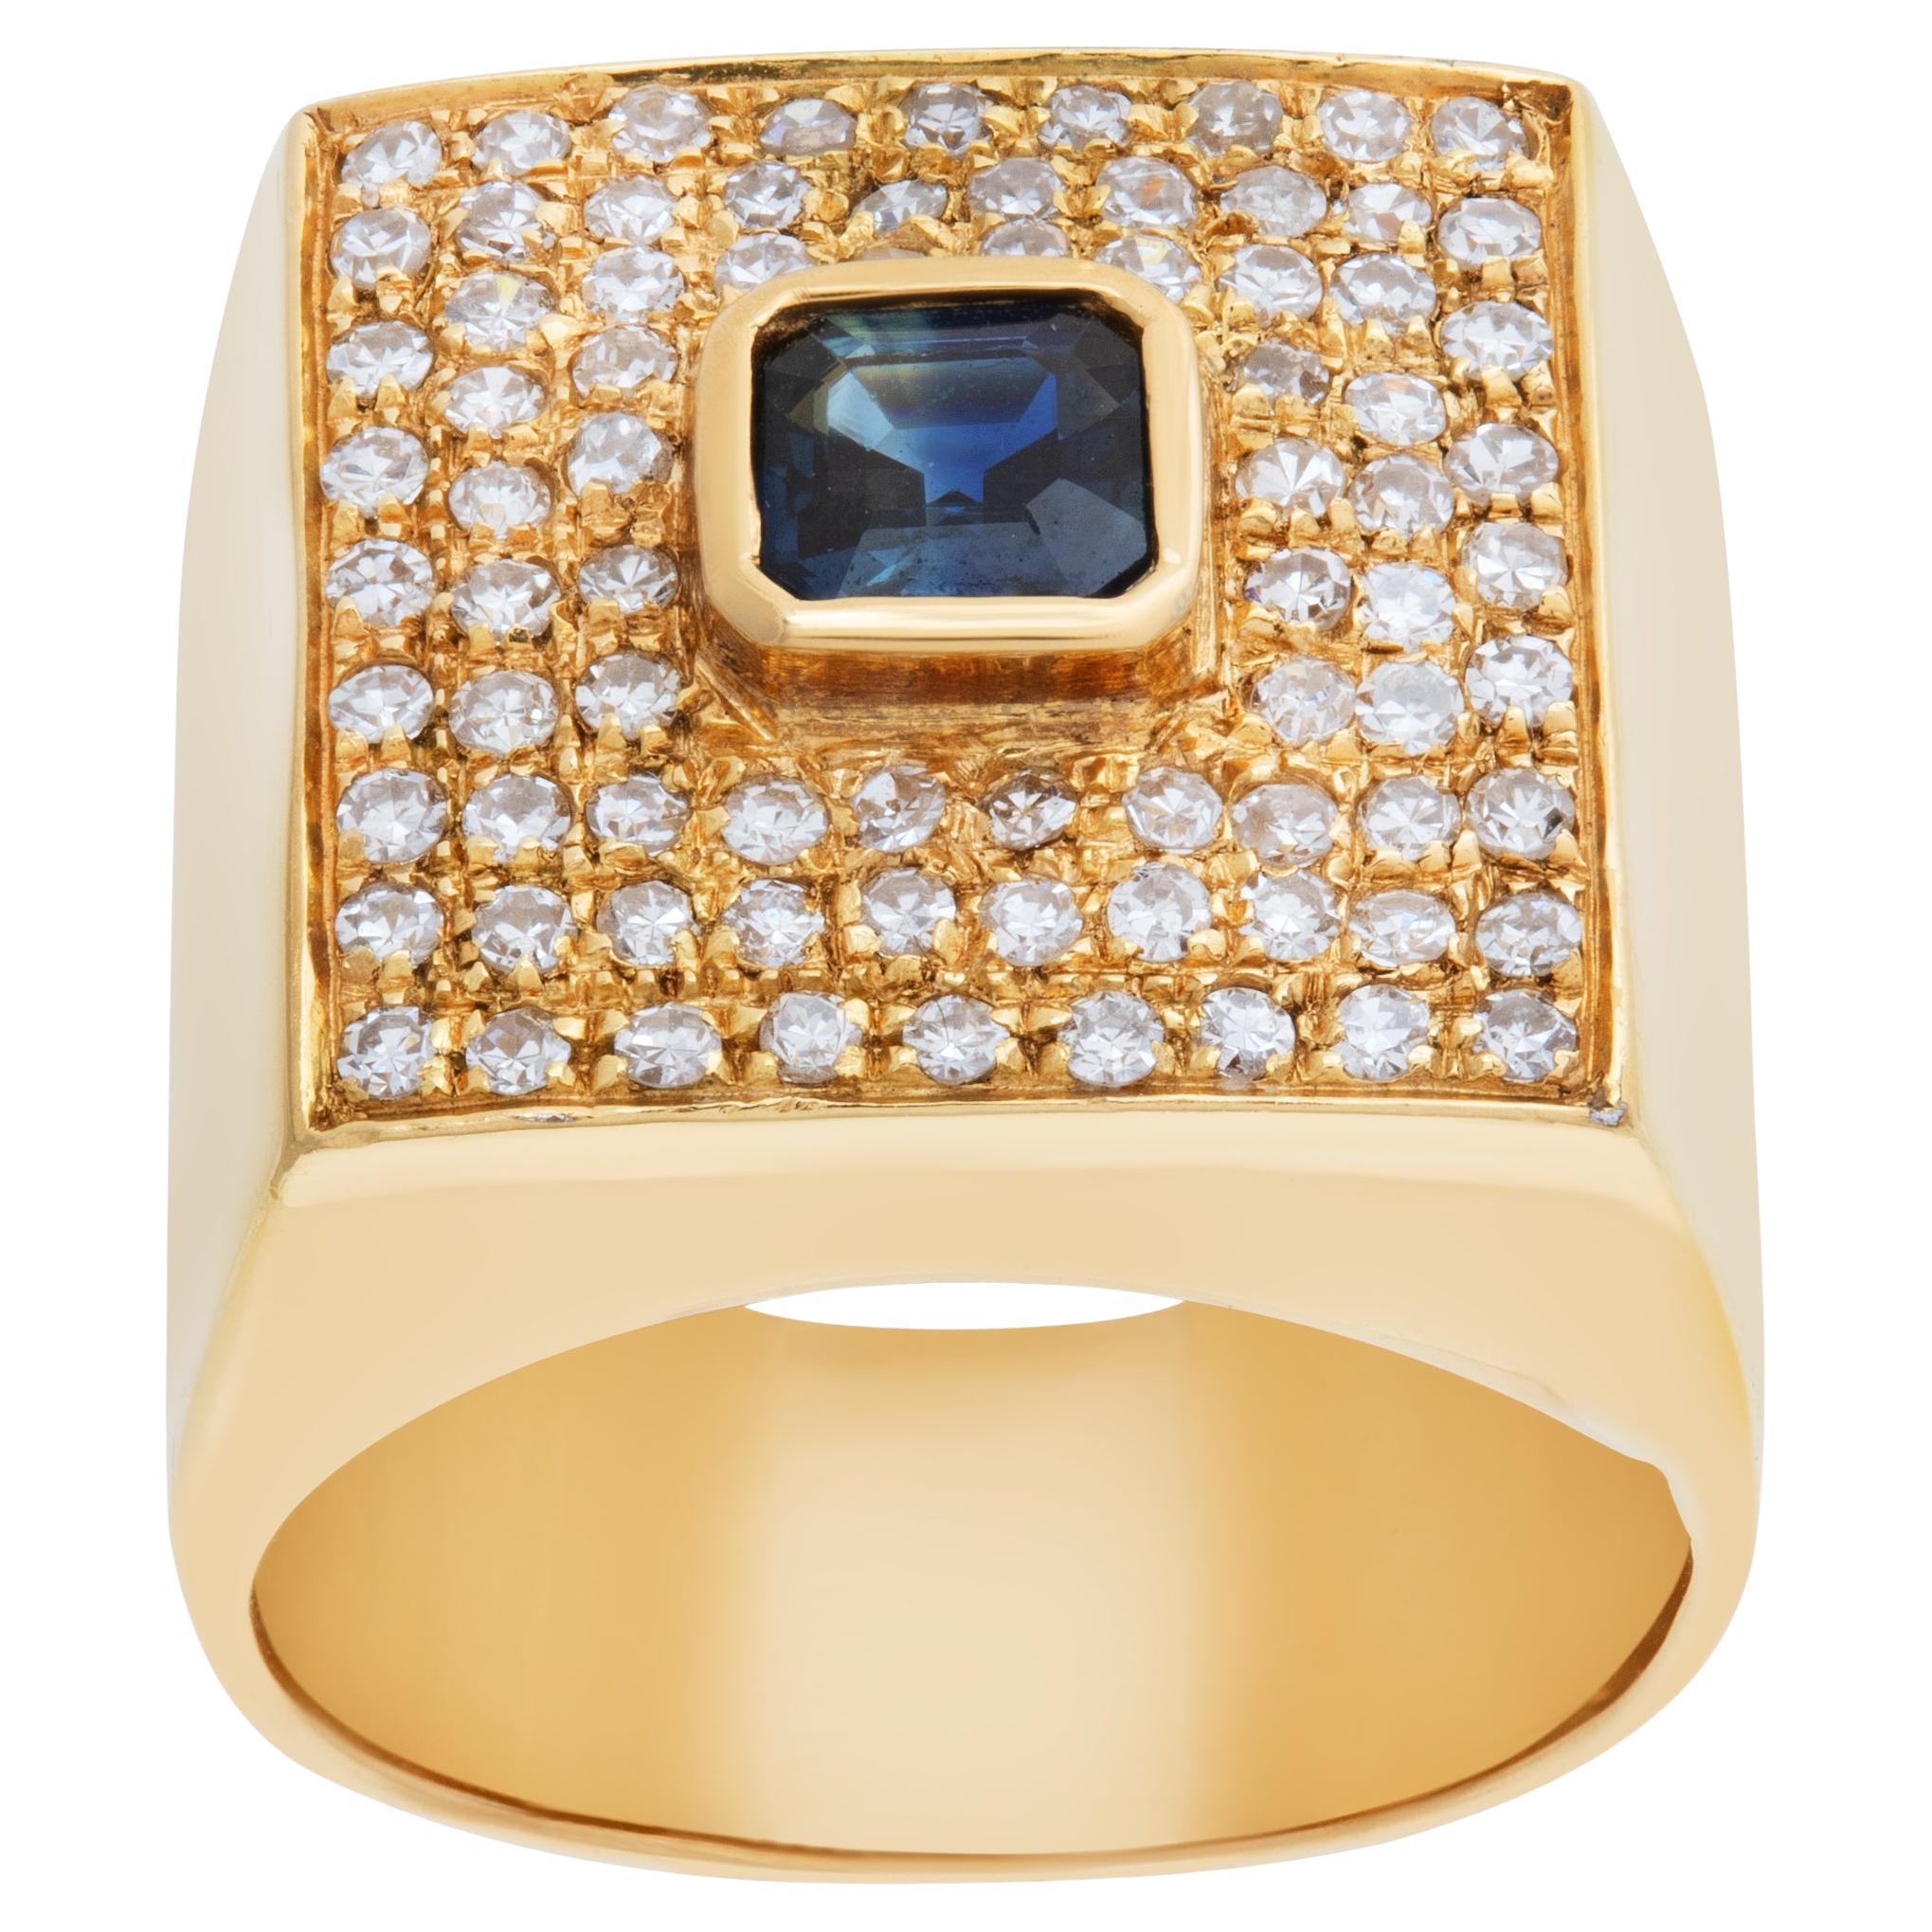 Stepped square emerald cut saphhire & diamonds ring in 18K yellow gold. 